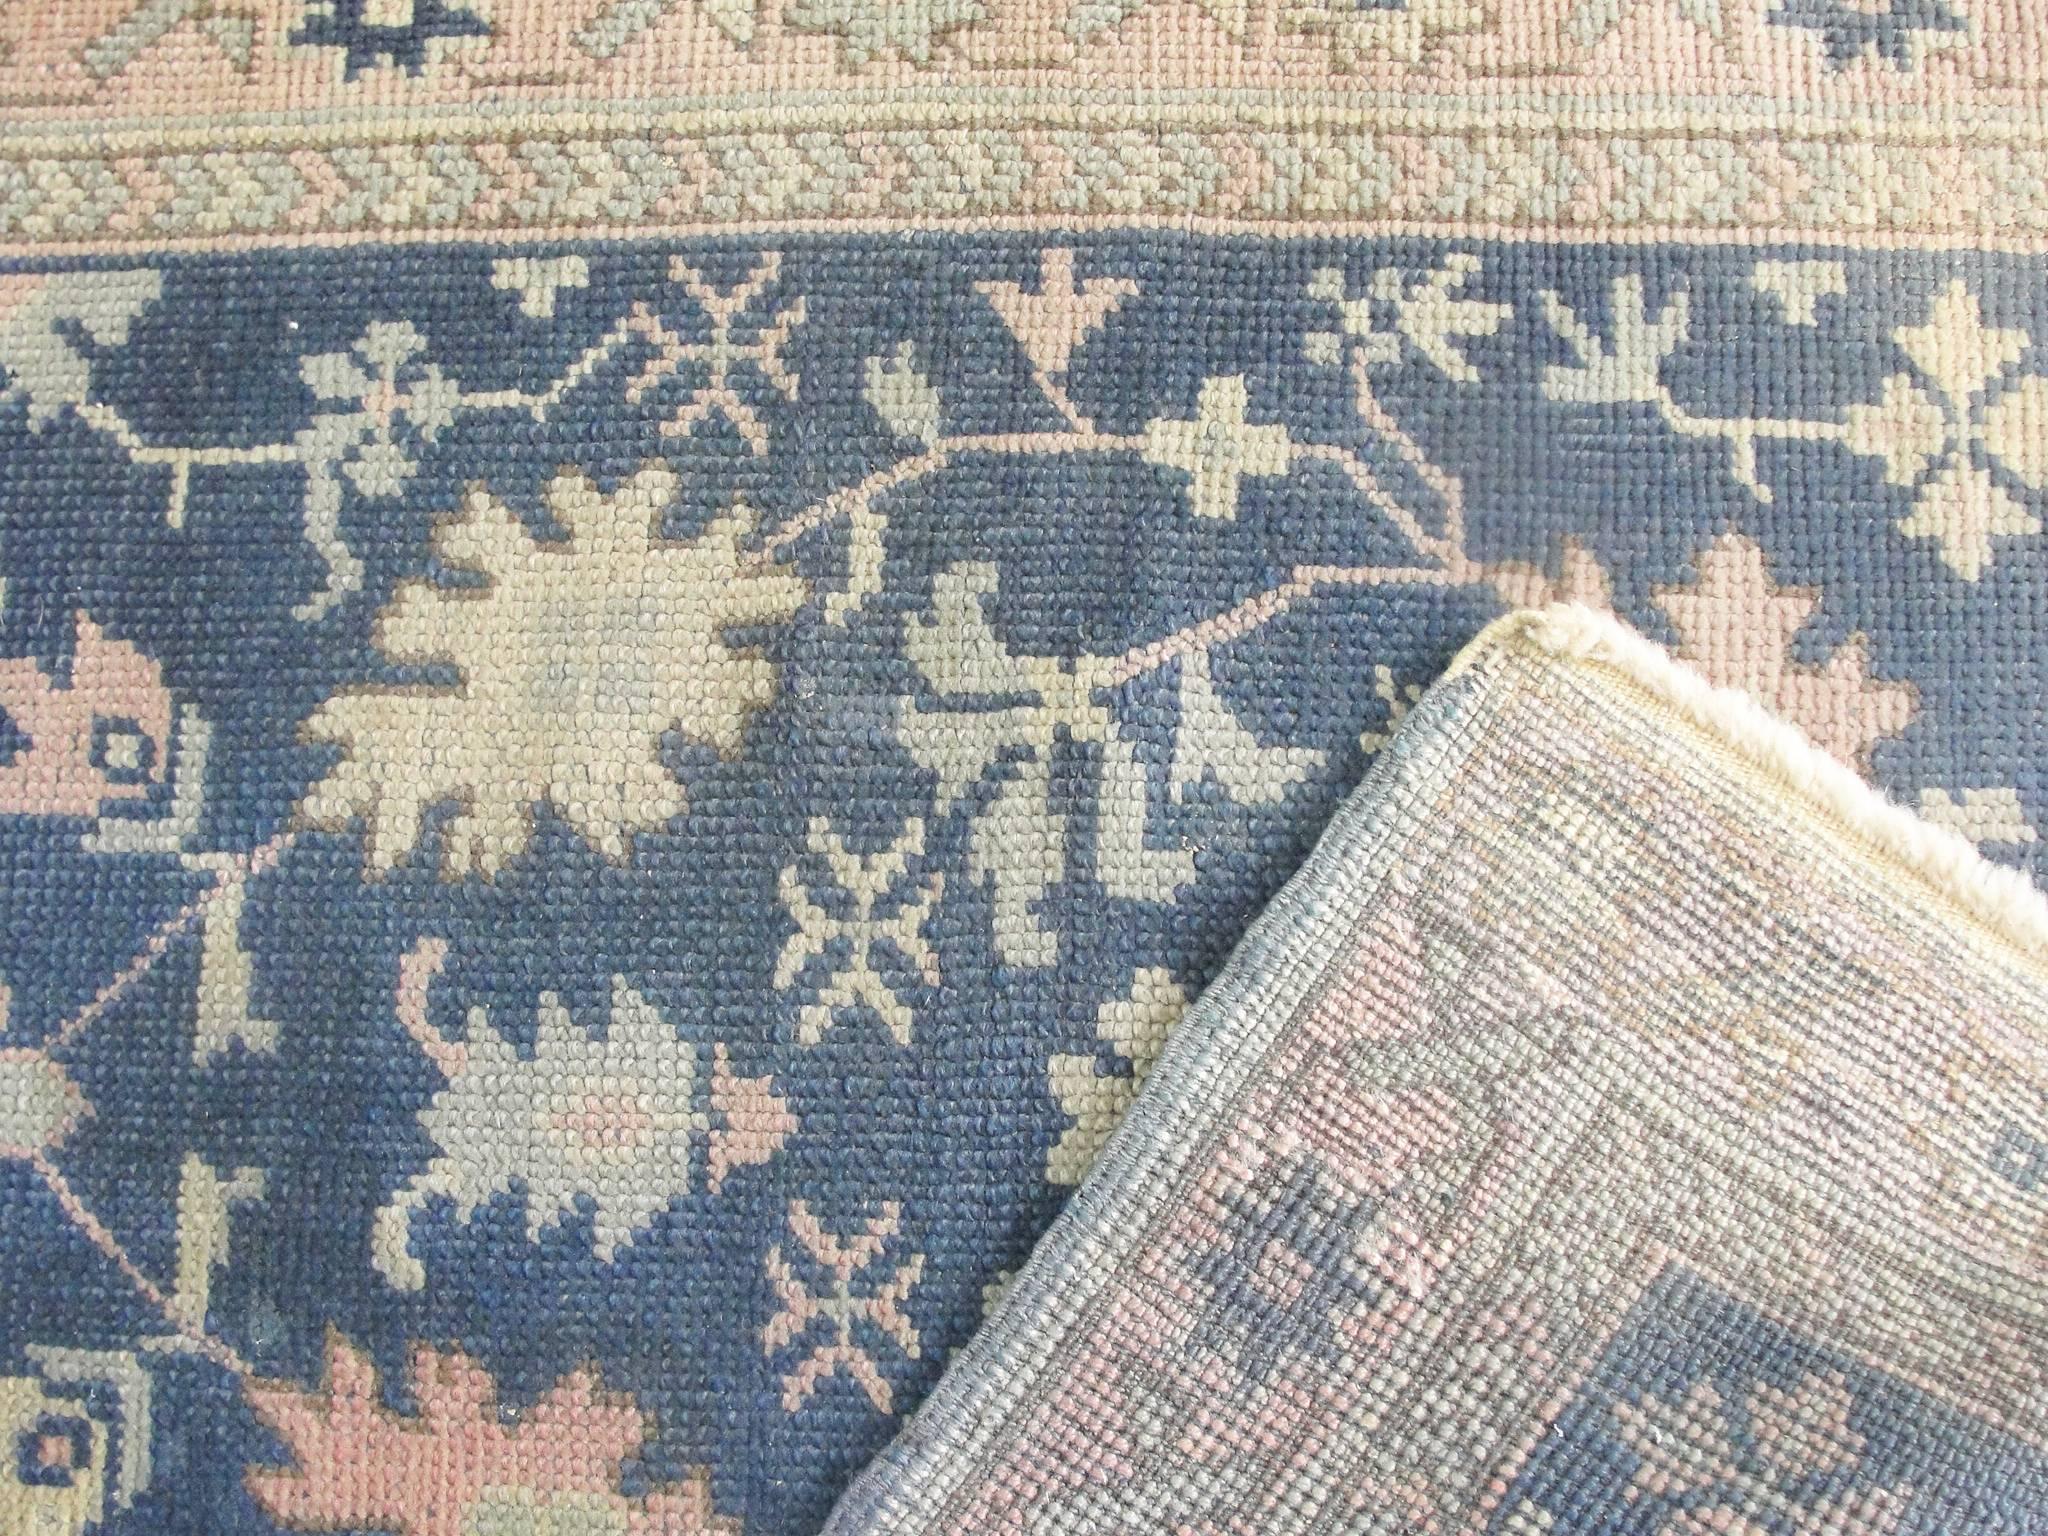 Size: 3'3" x 12'2" - 99 cm x 371 cm.
Origin: Western Anatolia.
Period: circa 1900.
Materials: Wool pile, wool warp and weft.
Condition: Very good.
Beautiful muted blue gray background color with large all over floral design. 
Ushak rugs